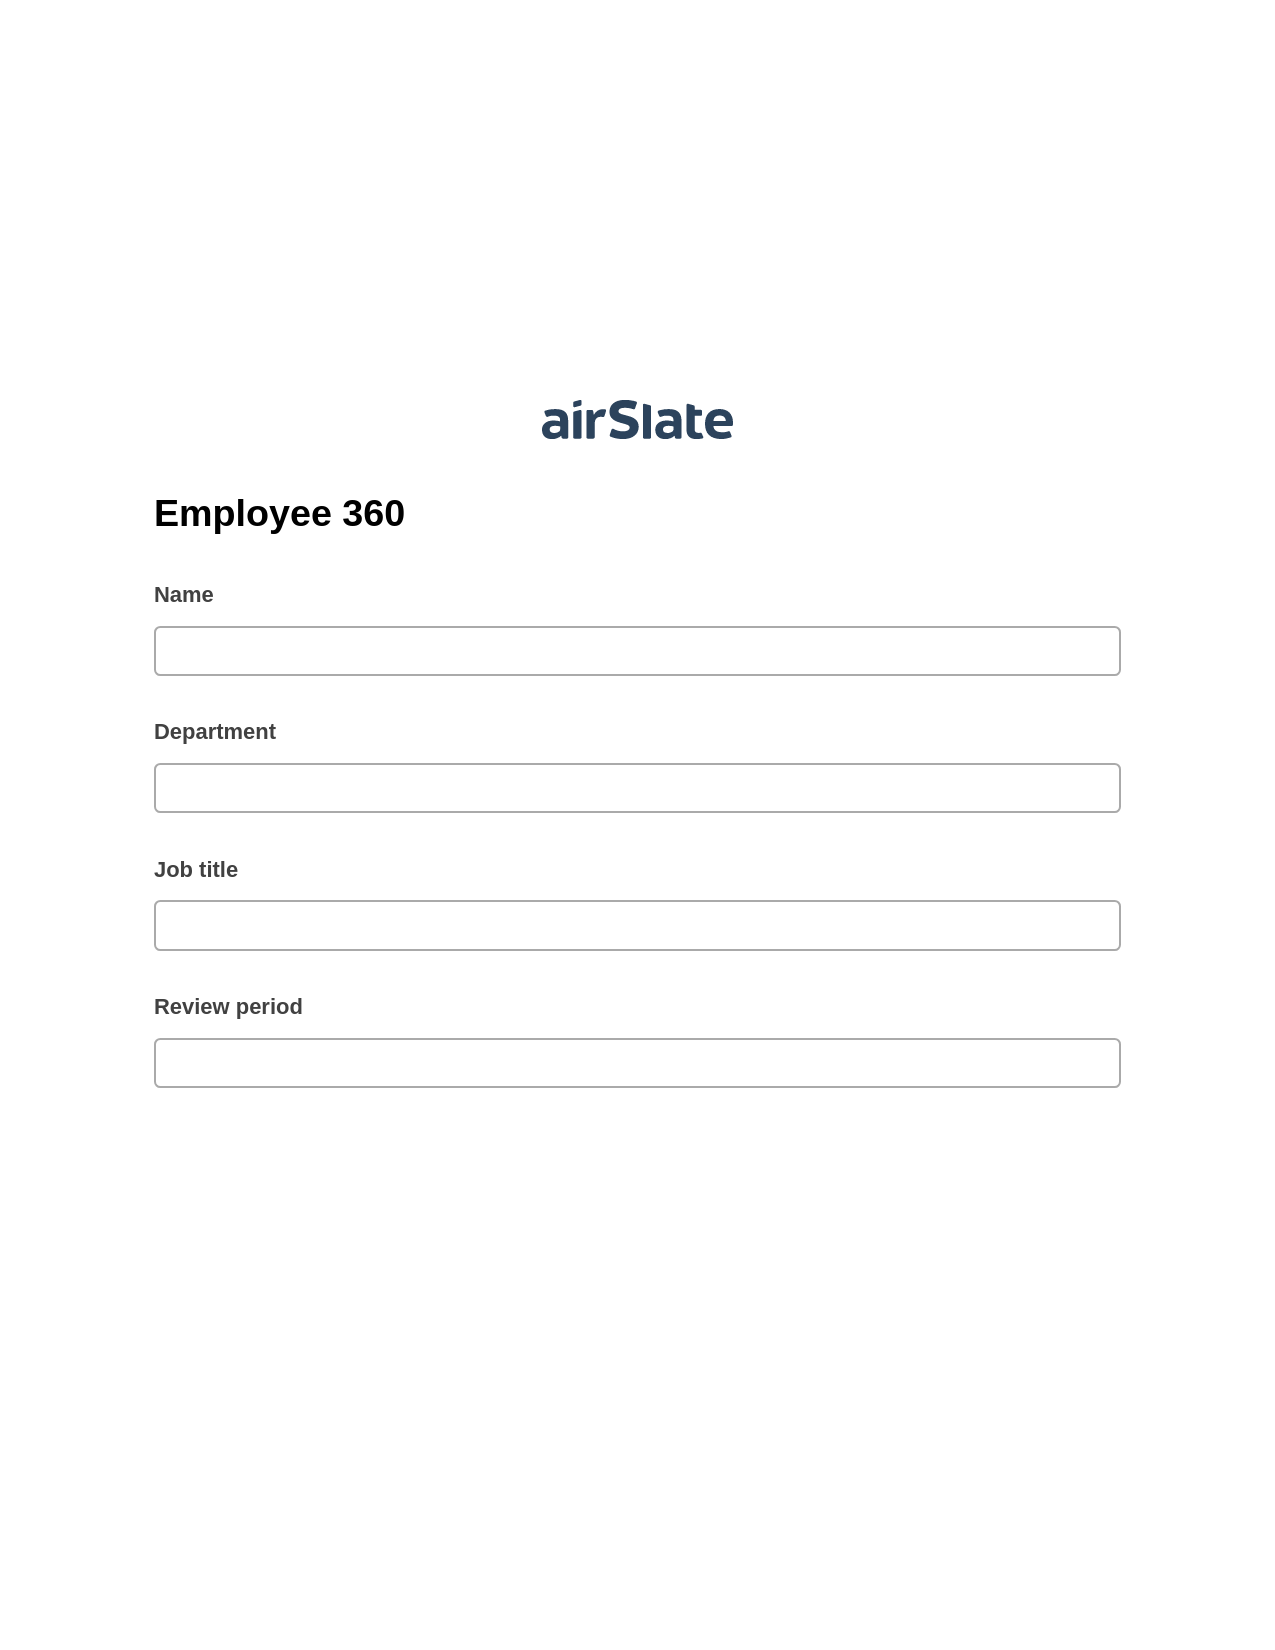 Employee 360 Pre-fill from AirTable Bot, Update MS Dynamics 365 Record Bot, Export to Google Sheet Bot